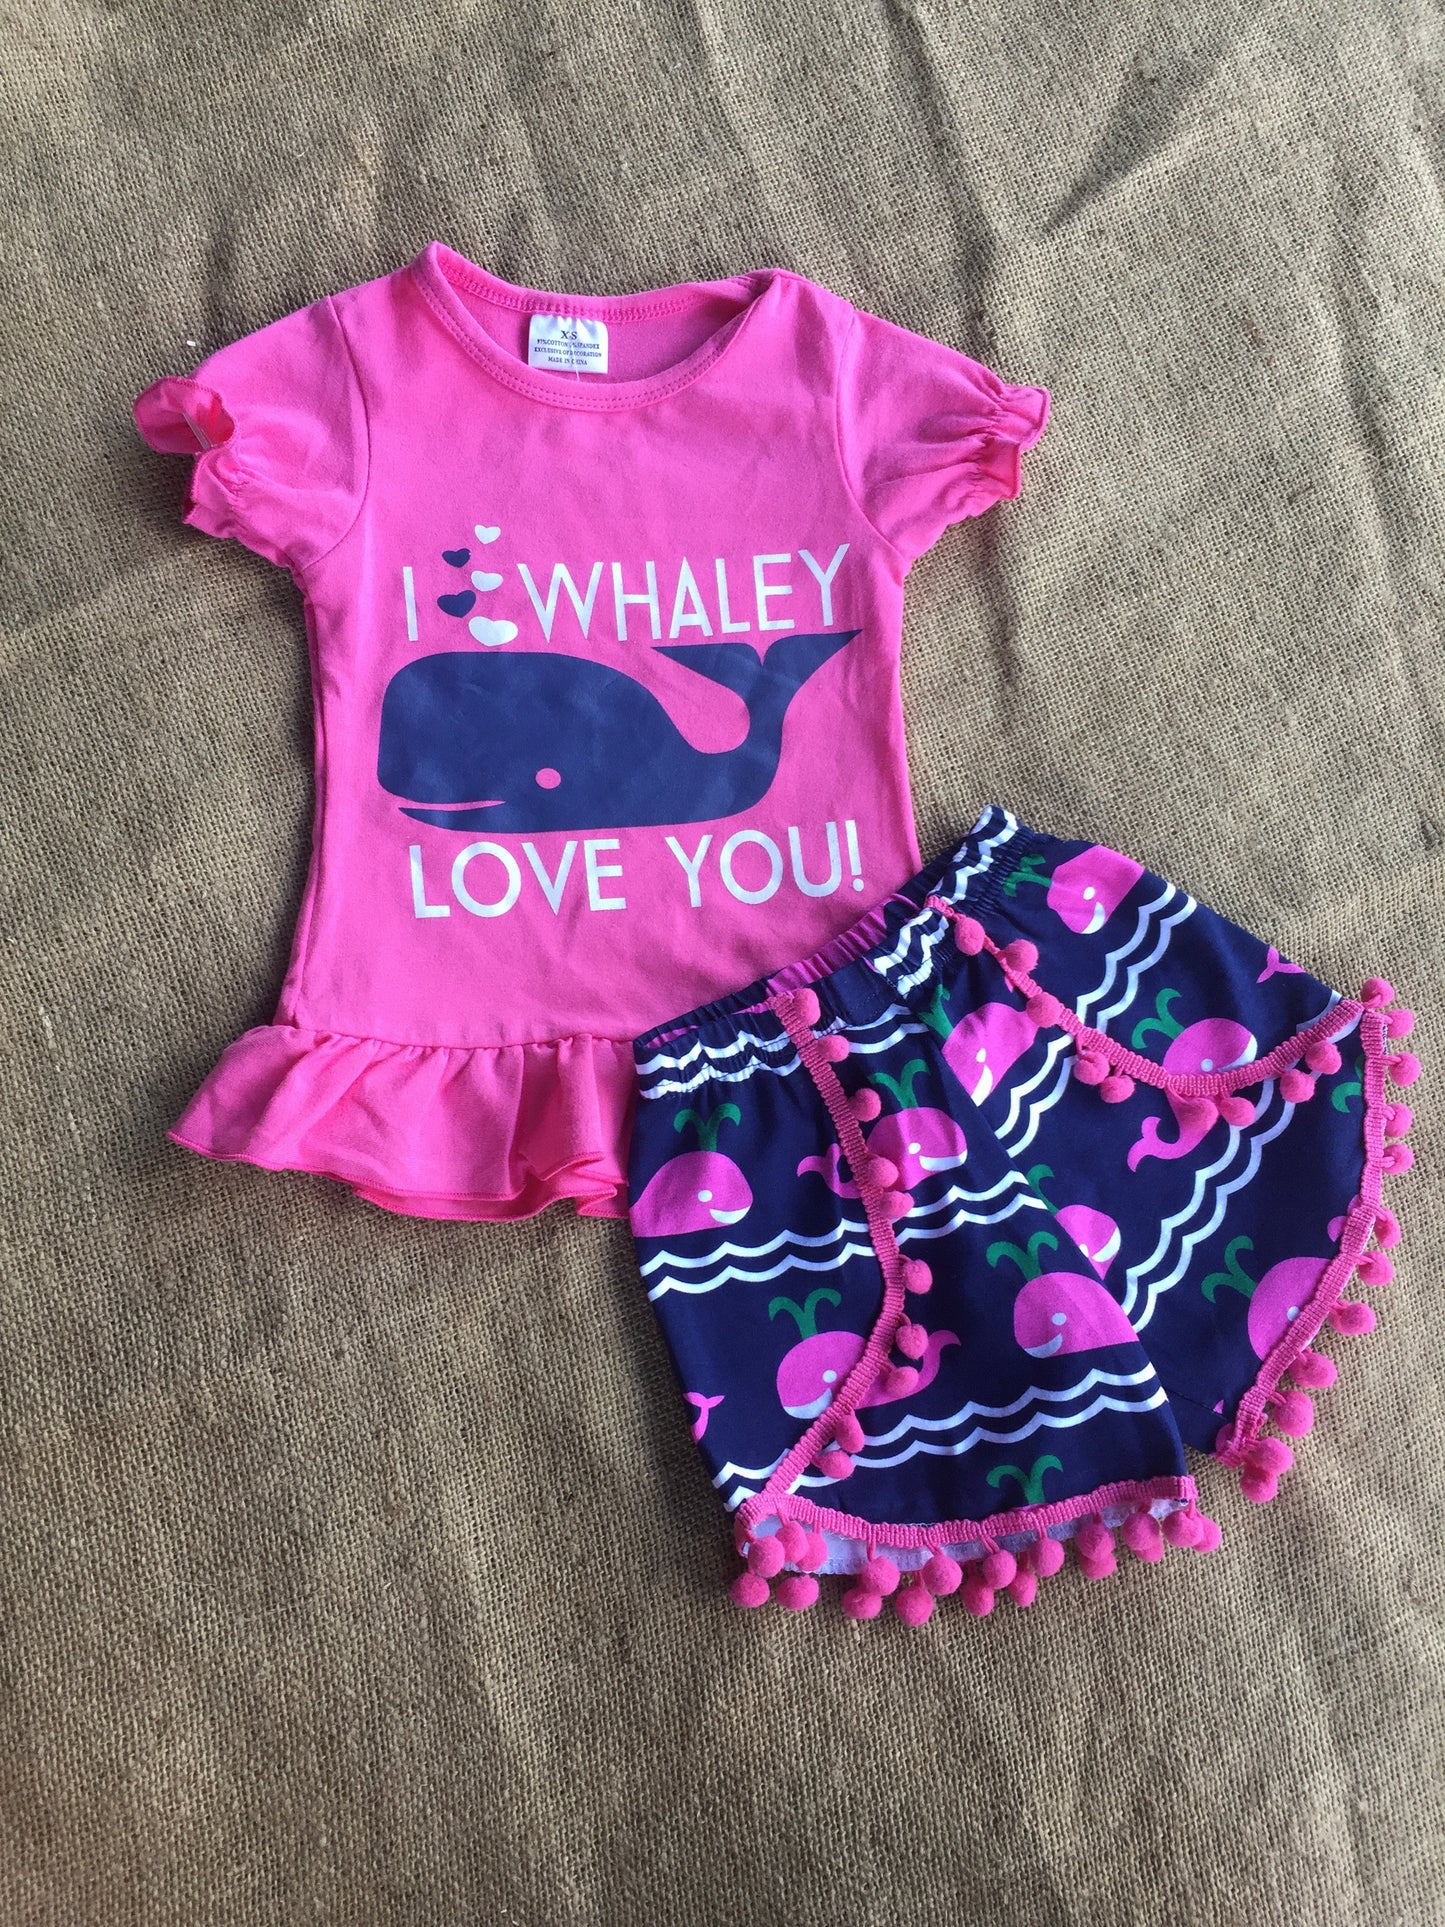 I Whaley Love You Children's Outfit